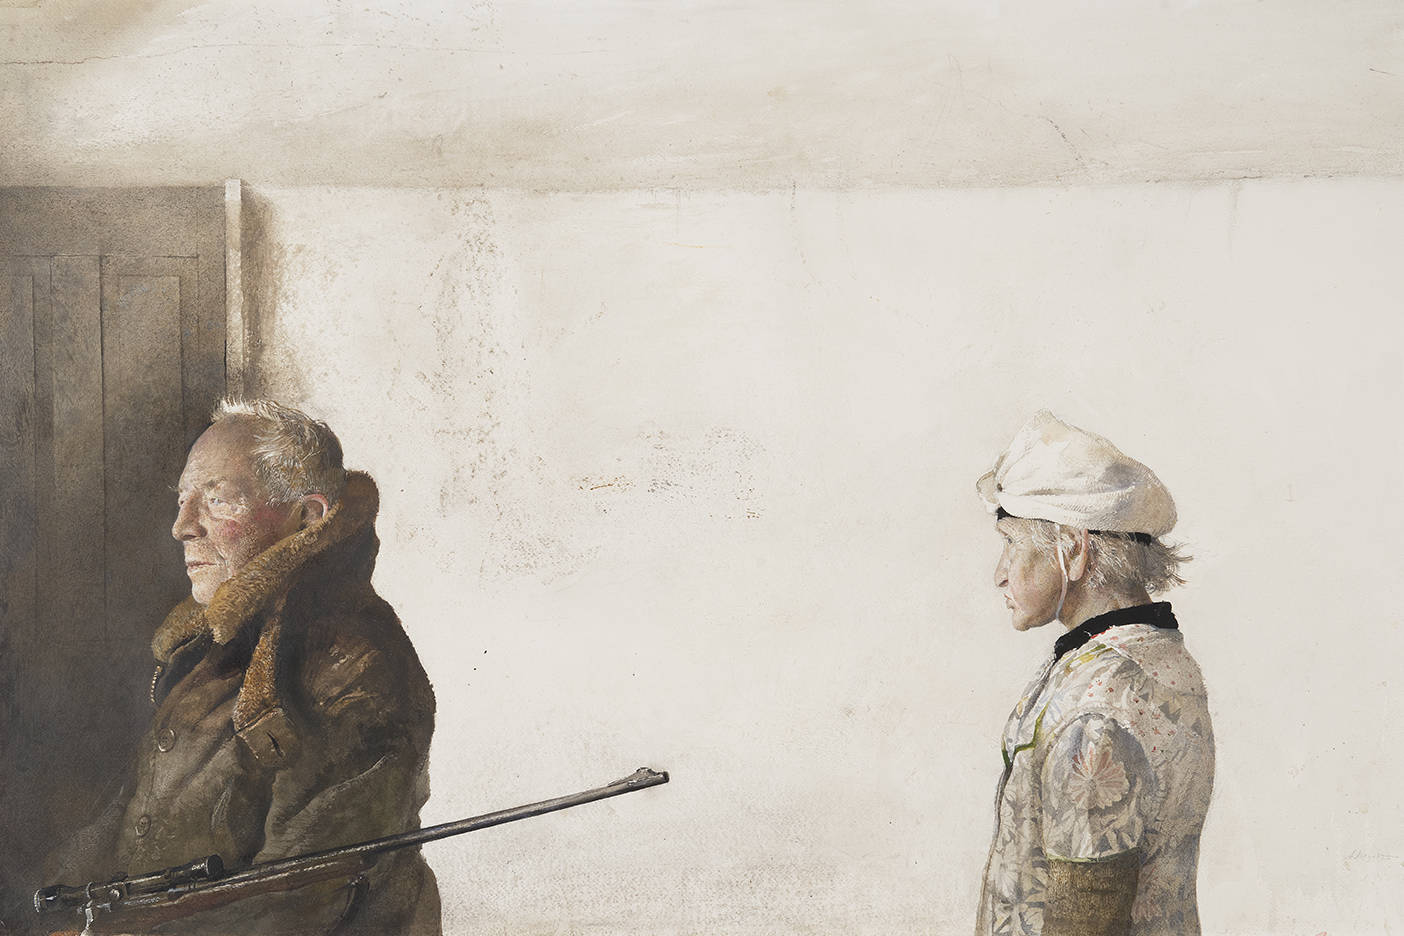 Reconsidering the Realism of Andrew Wyeth